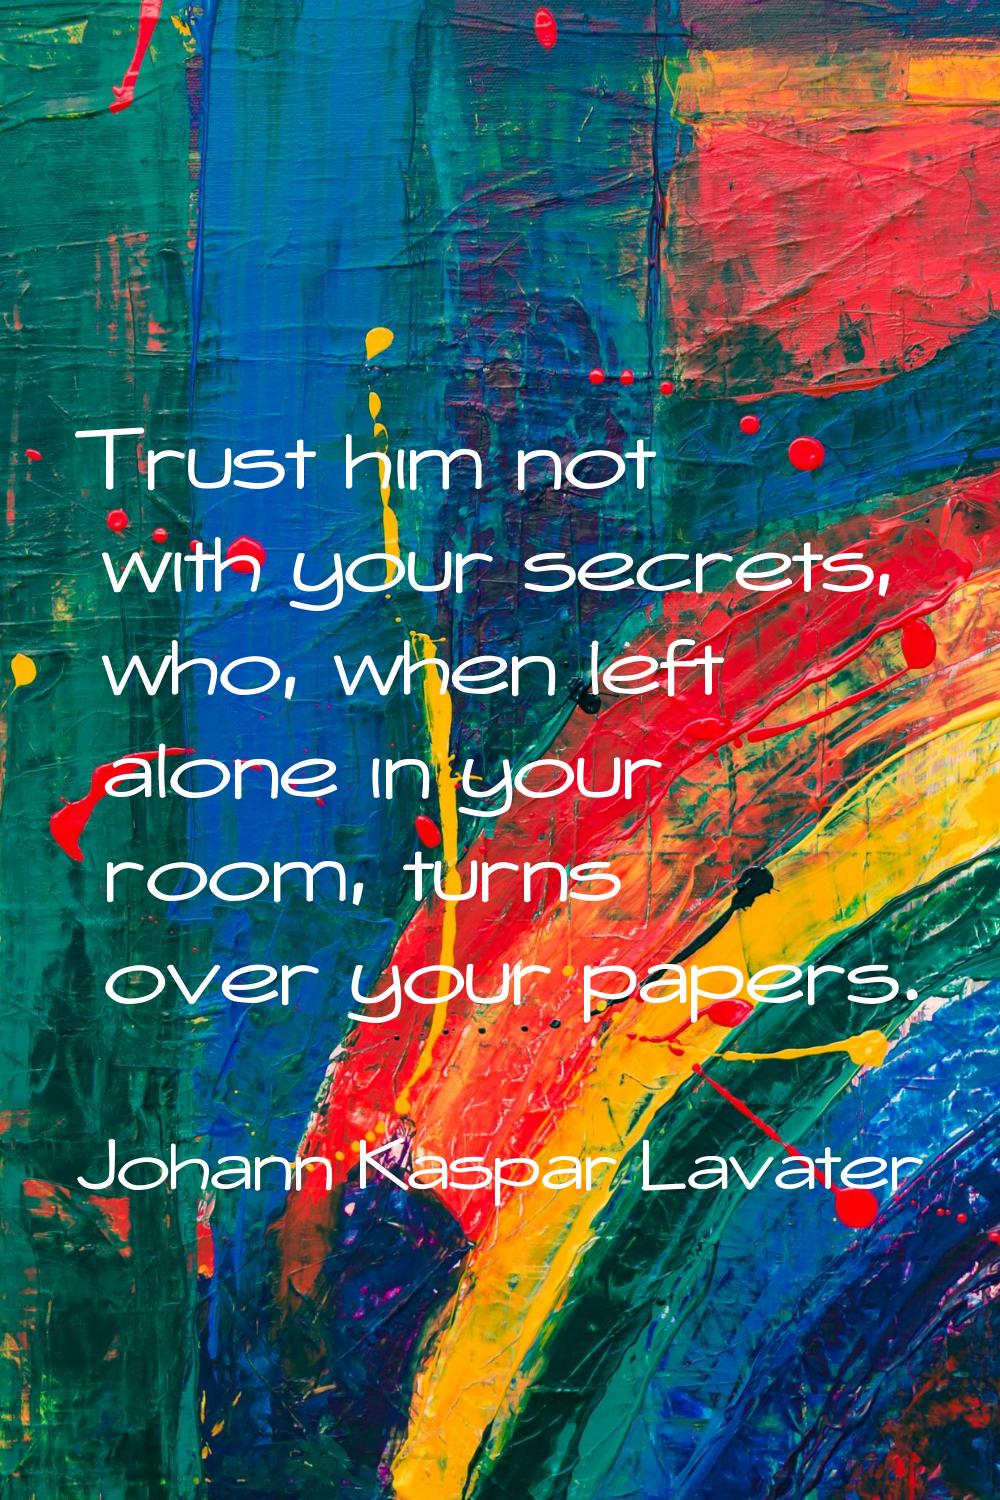 Trust him not with your secrets, who, when left alone in your room, turns over your papers.